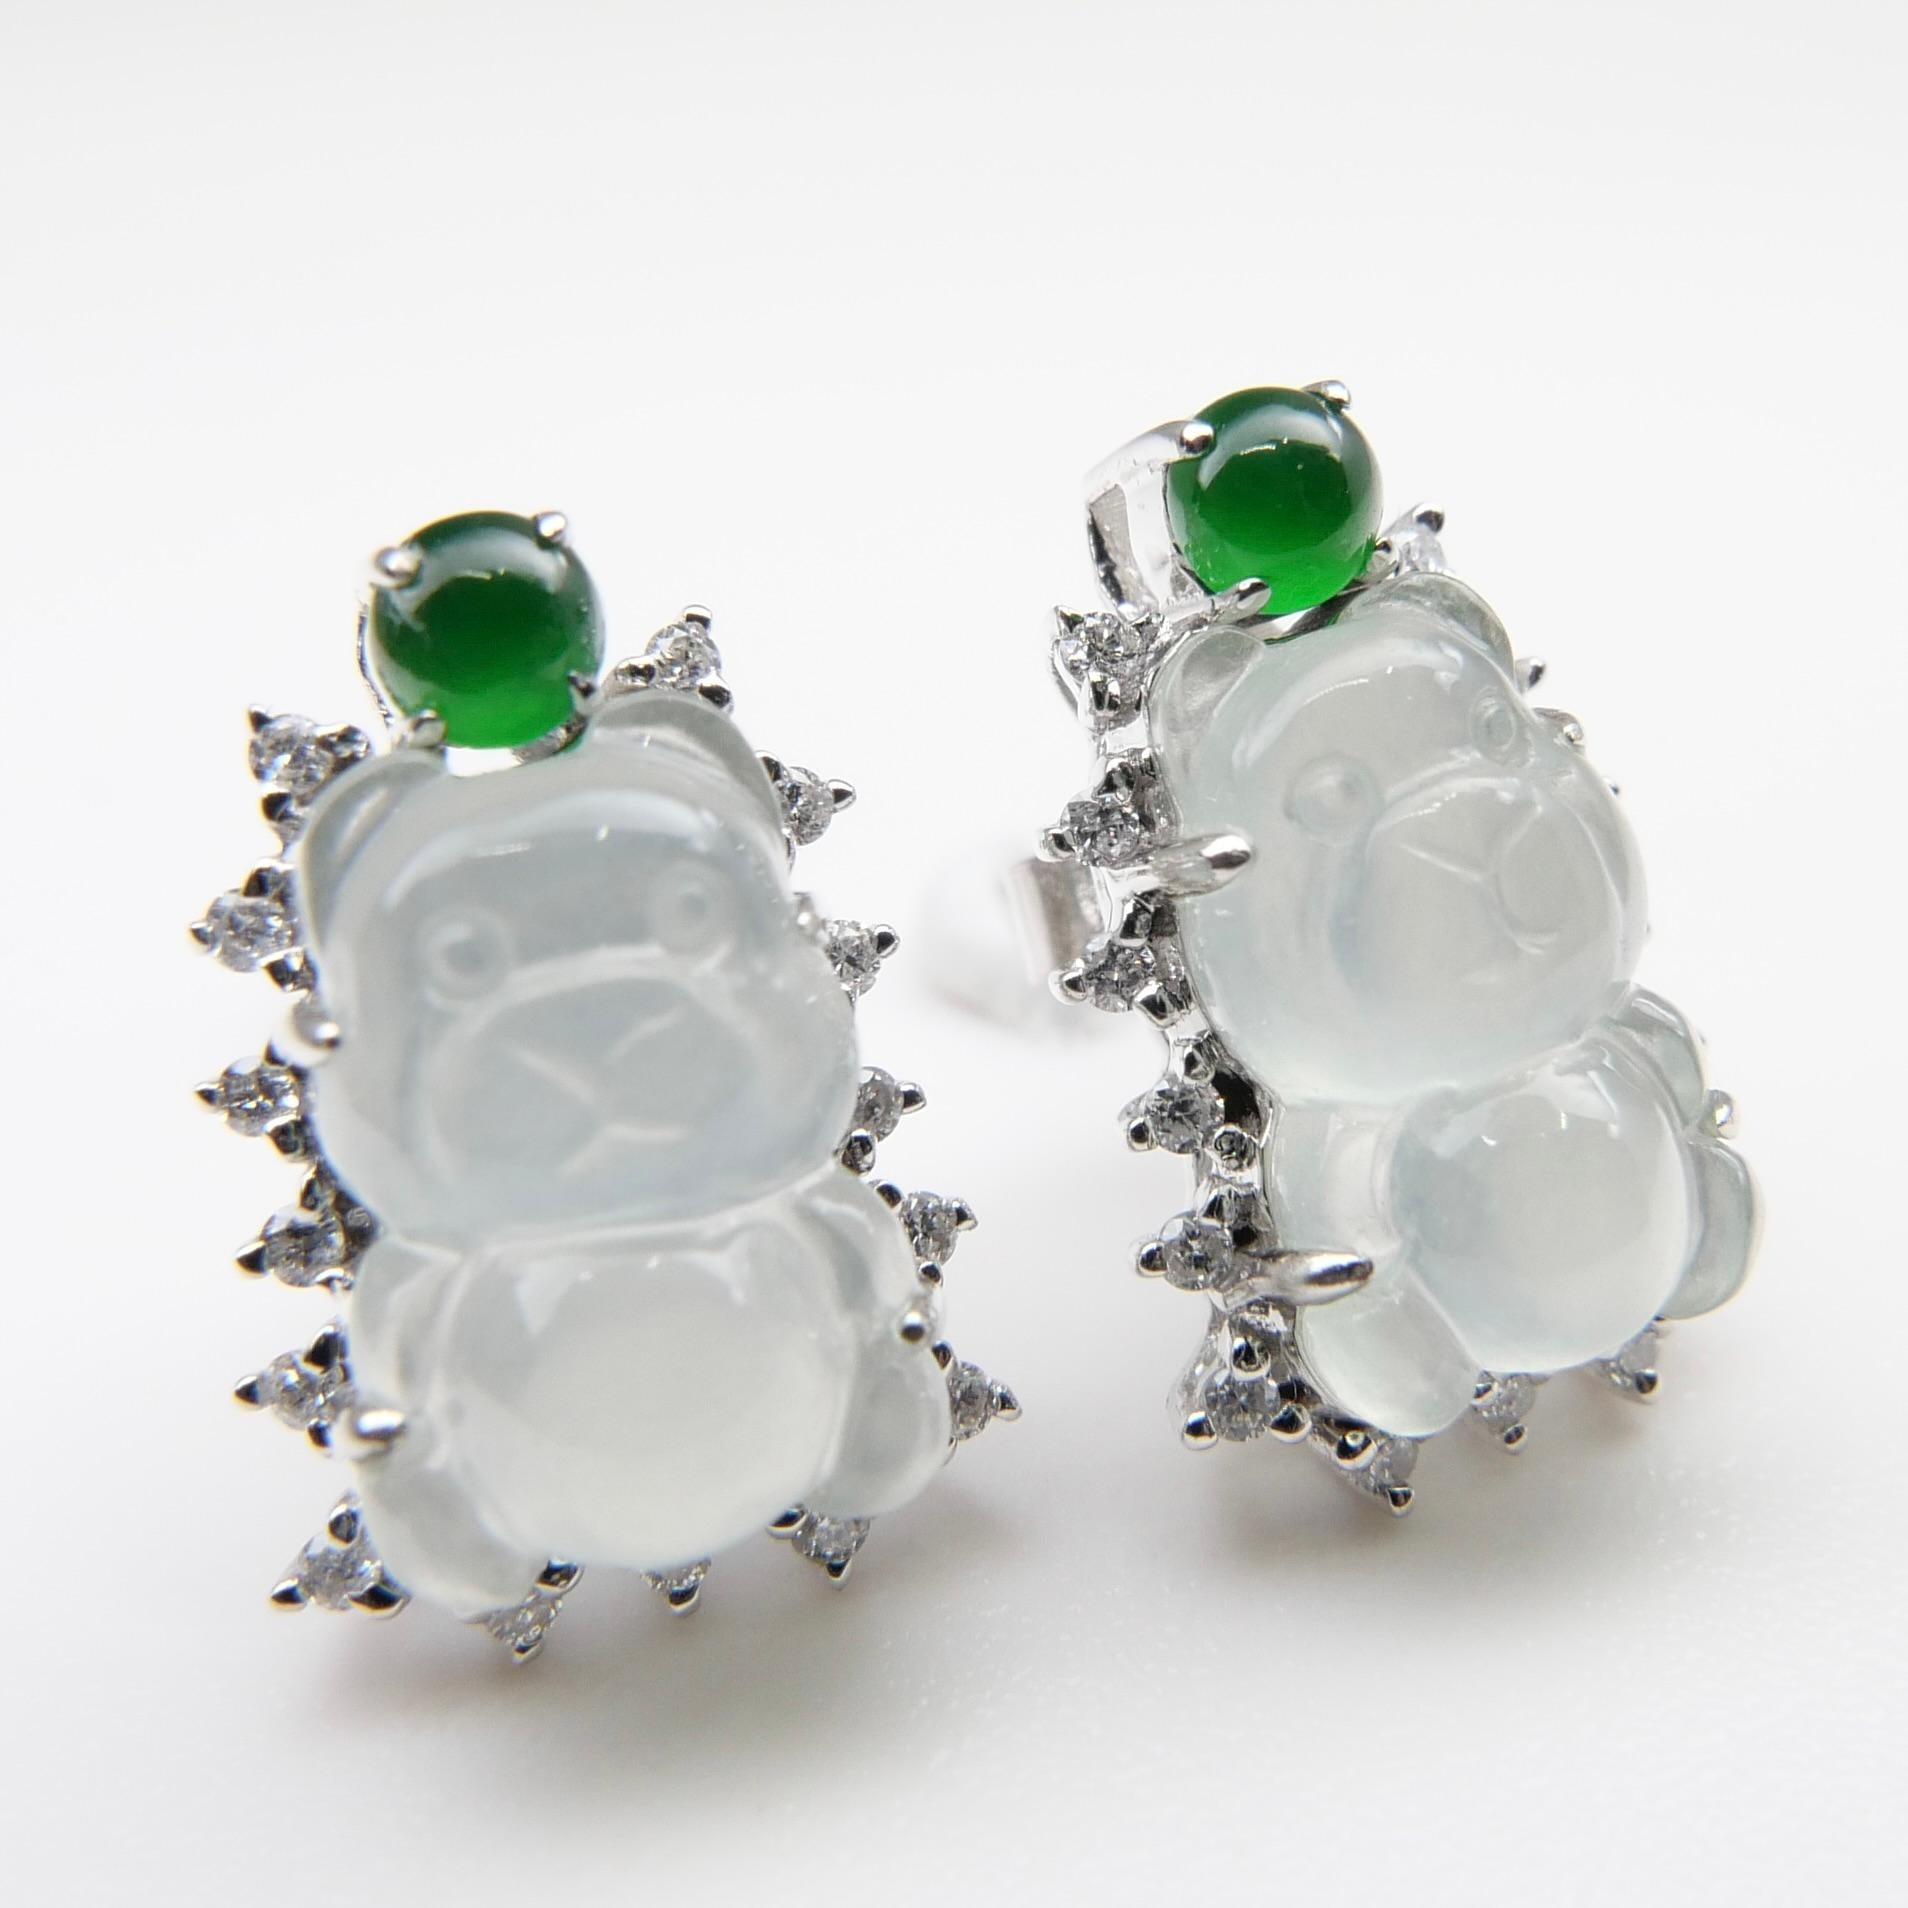 Rough Cut Certified Imperial & Icy Jade Diamond Gummy Bear Earrings, Great for Kids! For Sale